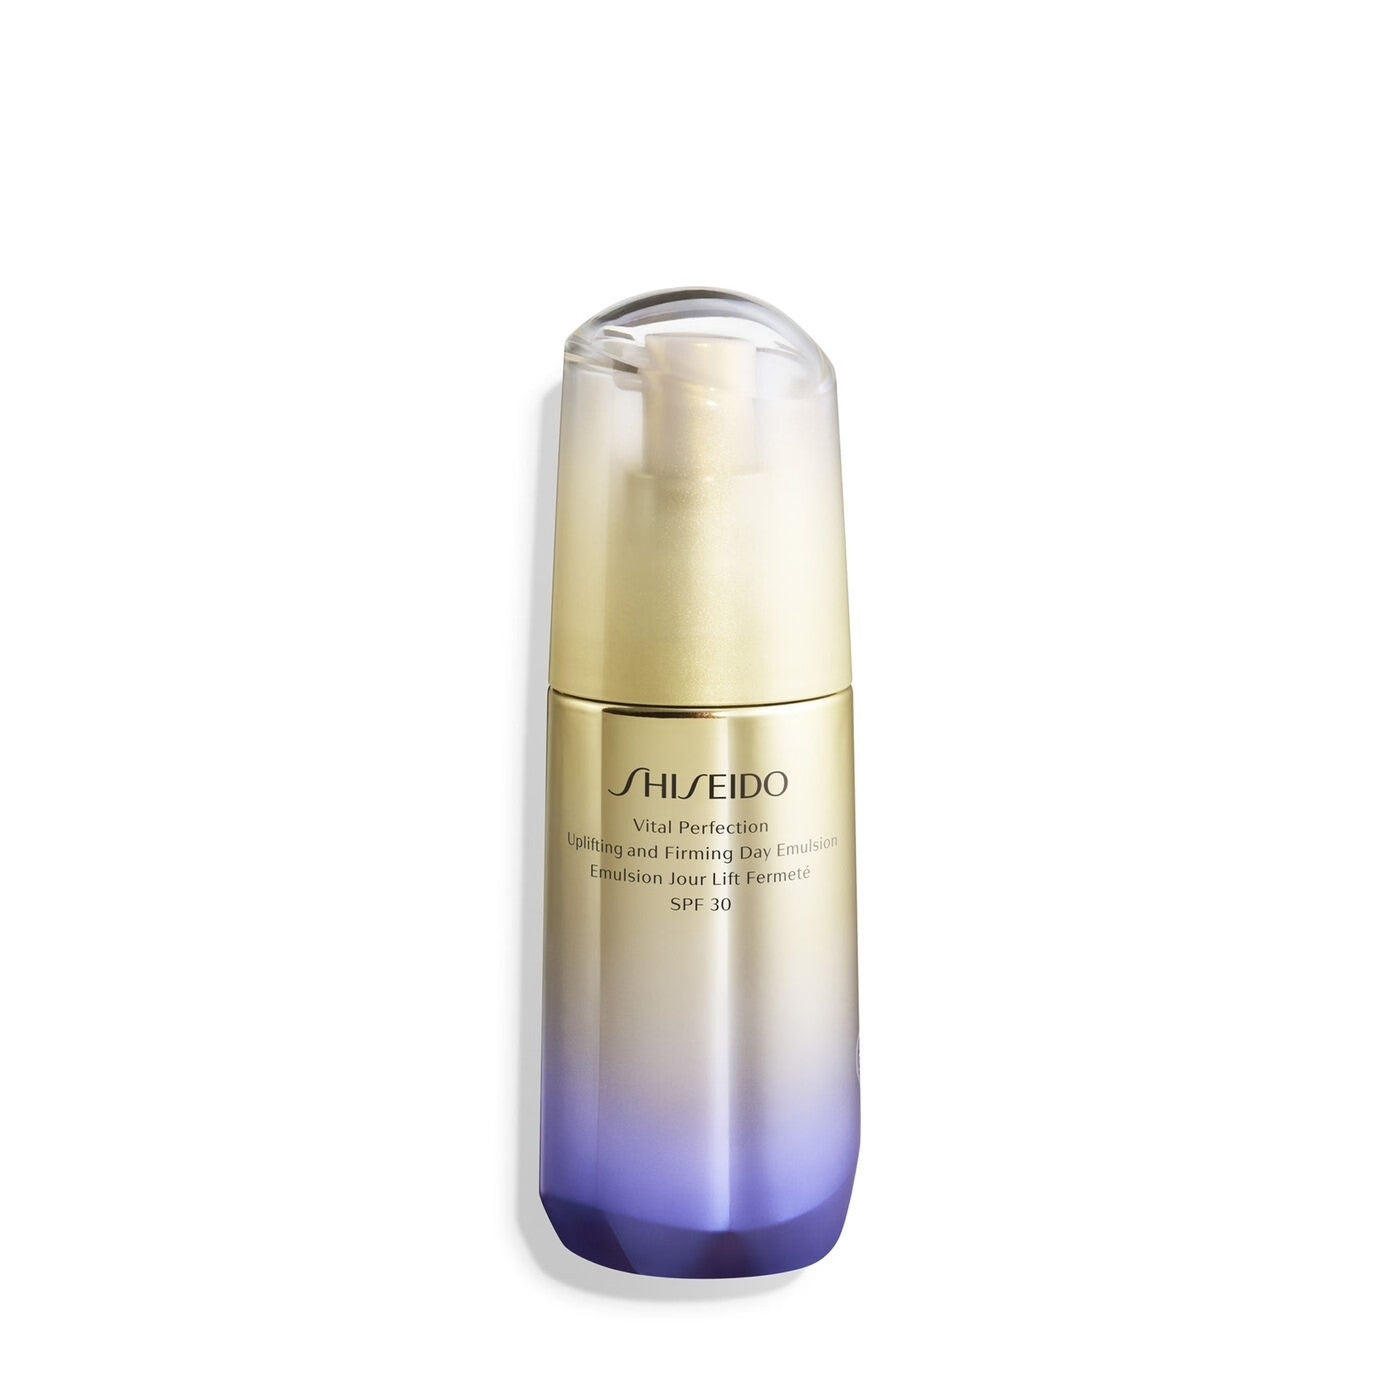 VITAL PERFECTION uplifting & firming day emulsion